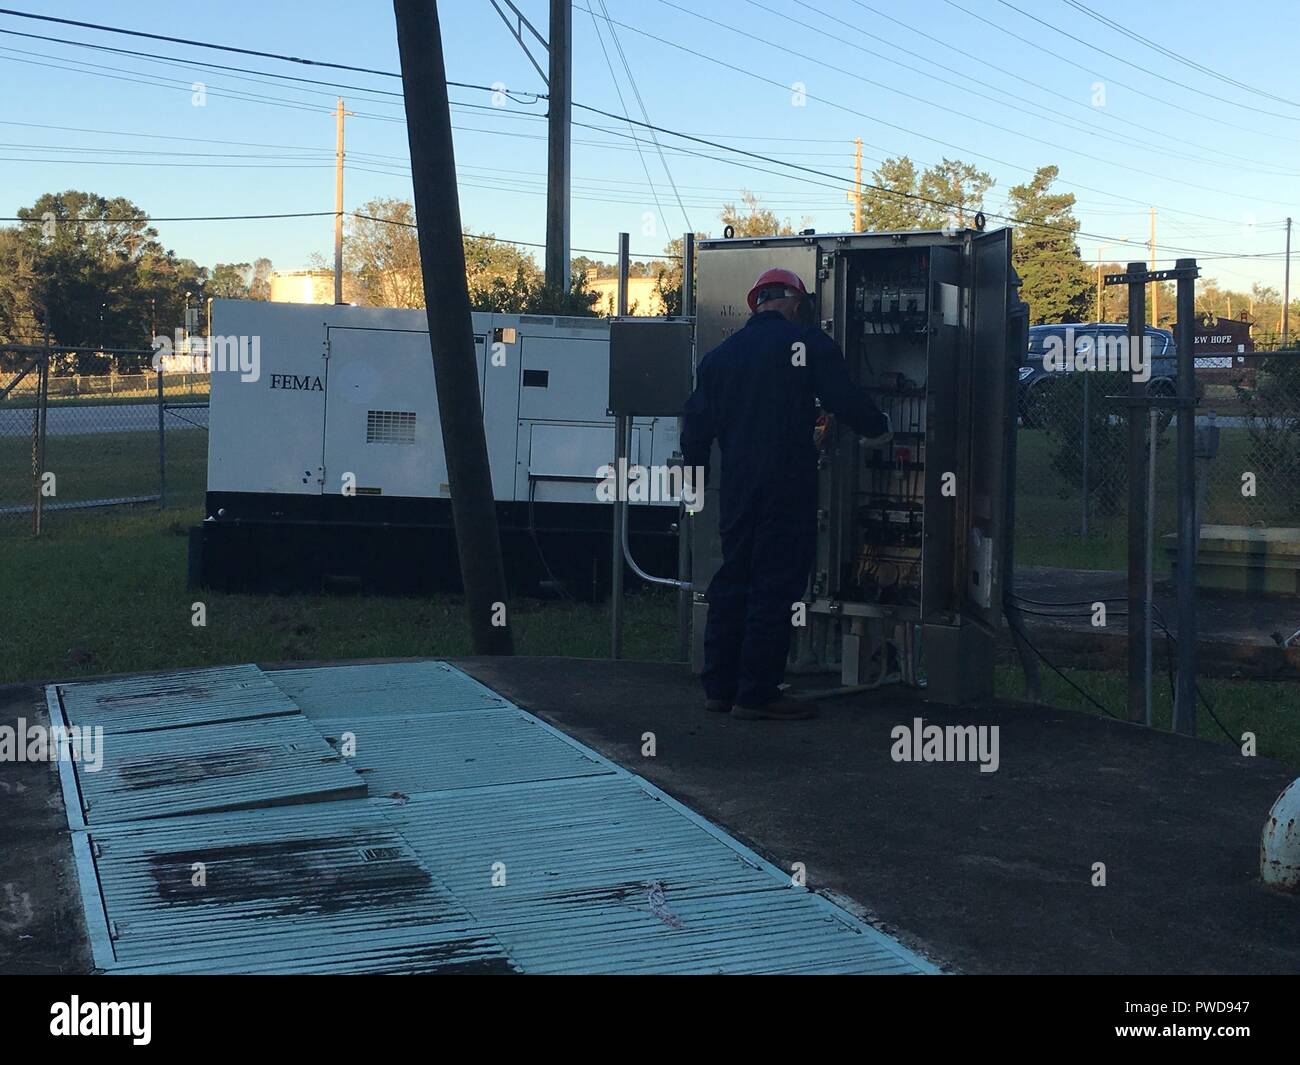 The first emergency generator in USACE's Emergency Power Mission in Georgia was installed last night and is supporting critical wastewater infrastructure in Albany with emergency temporary power while the larger commercial grid continues to be restored, October 13, 2018. Shown: Emergency Power Planning and Response Team personnel from the Savannah District oversee the installation. The Emergency Power Mission is being managed by the U.S. Army Corps of Engineers there in support of FEMA Federal Emergency Management Agency as part of the larger federal response to Hurricane Michael. (Photo by Ch Stock Photo